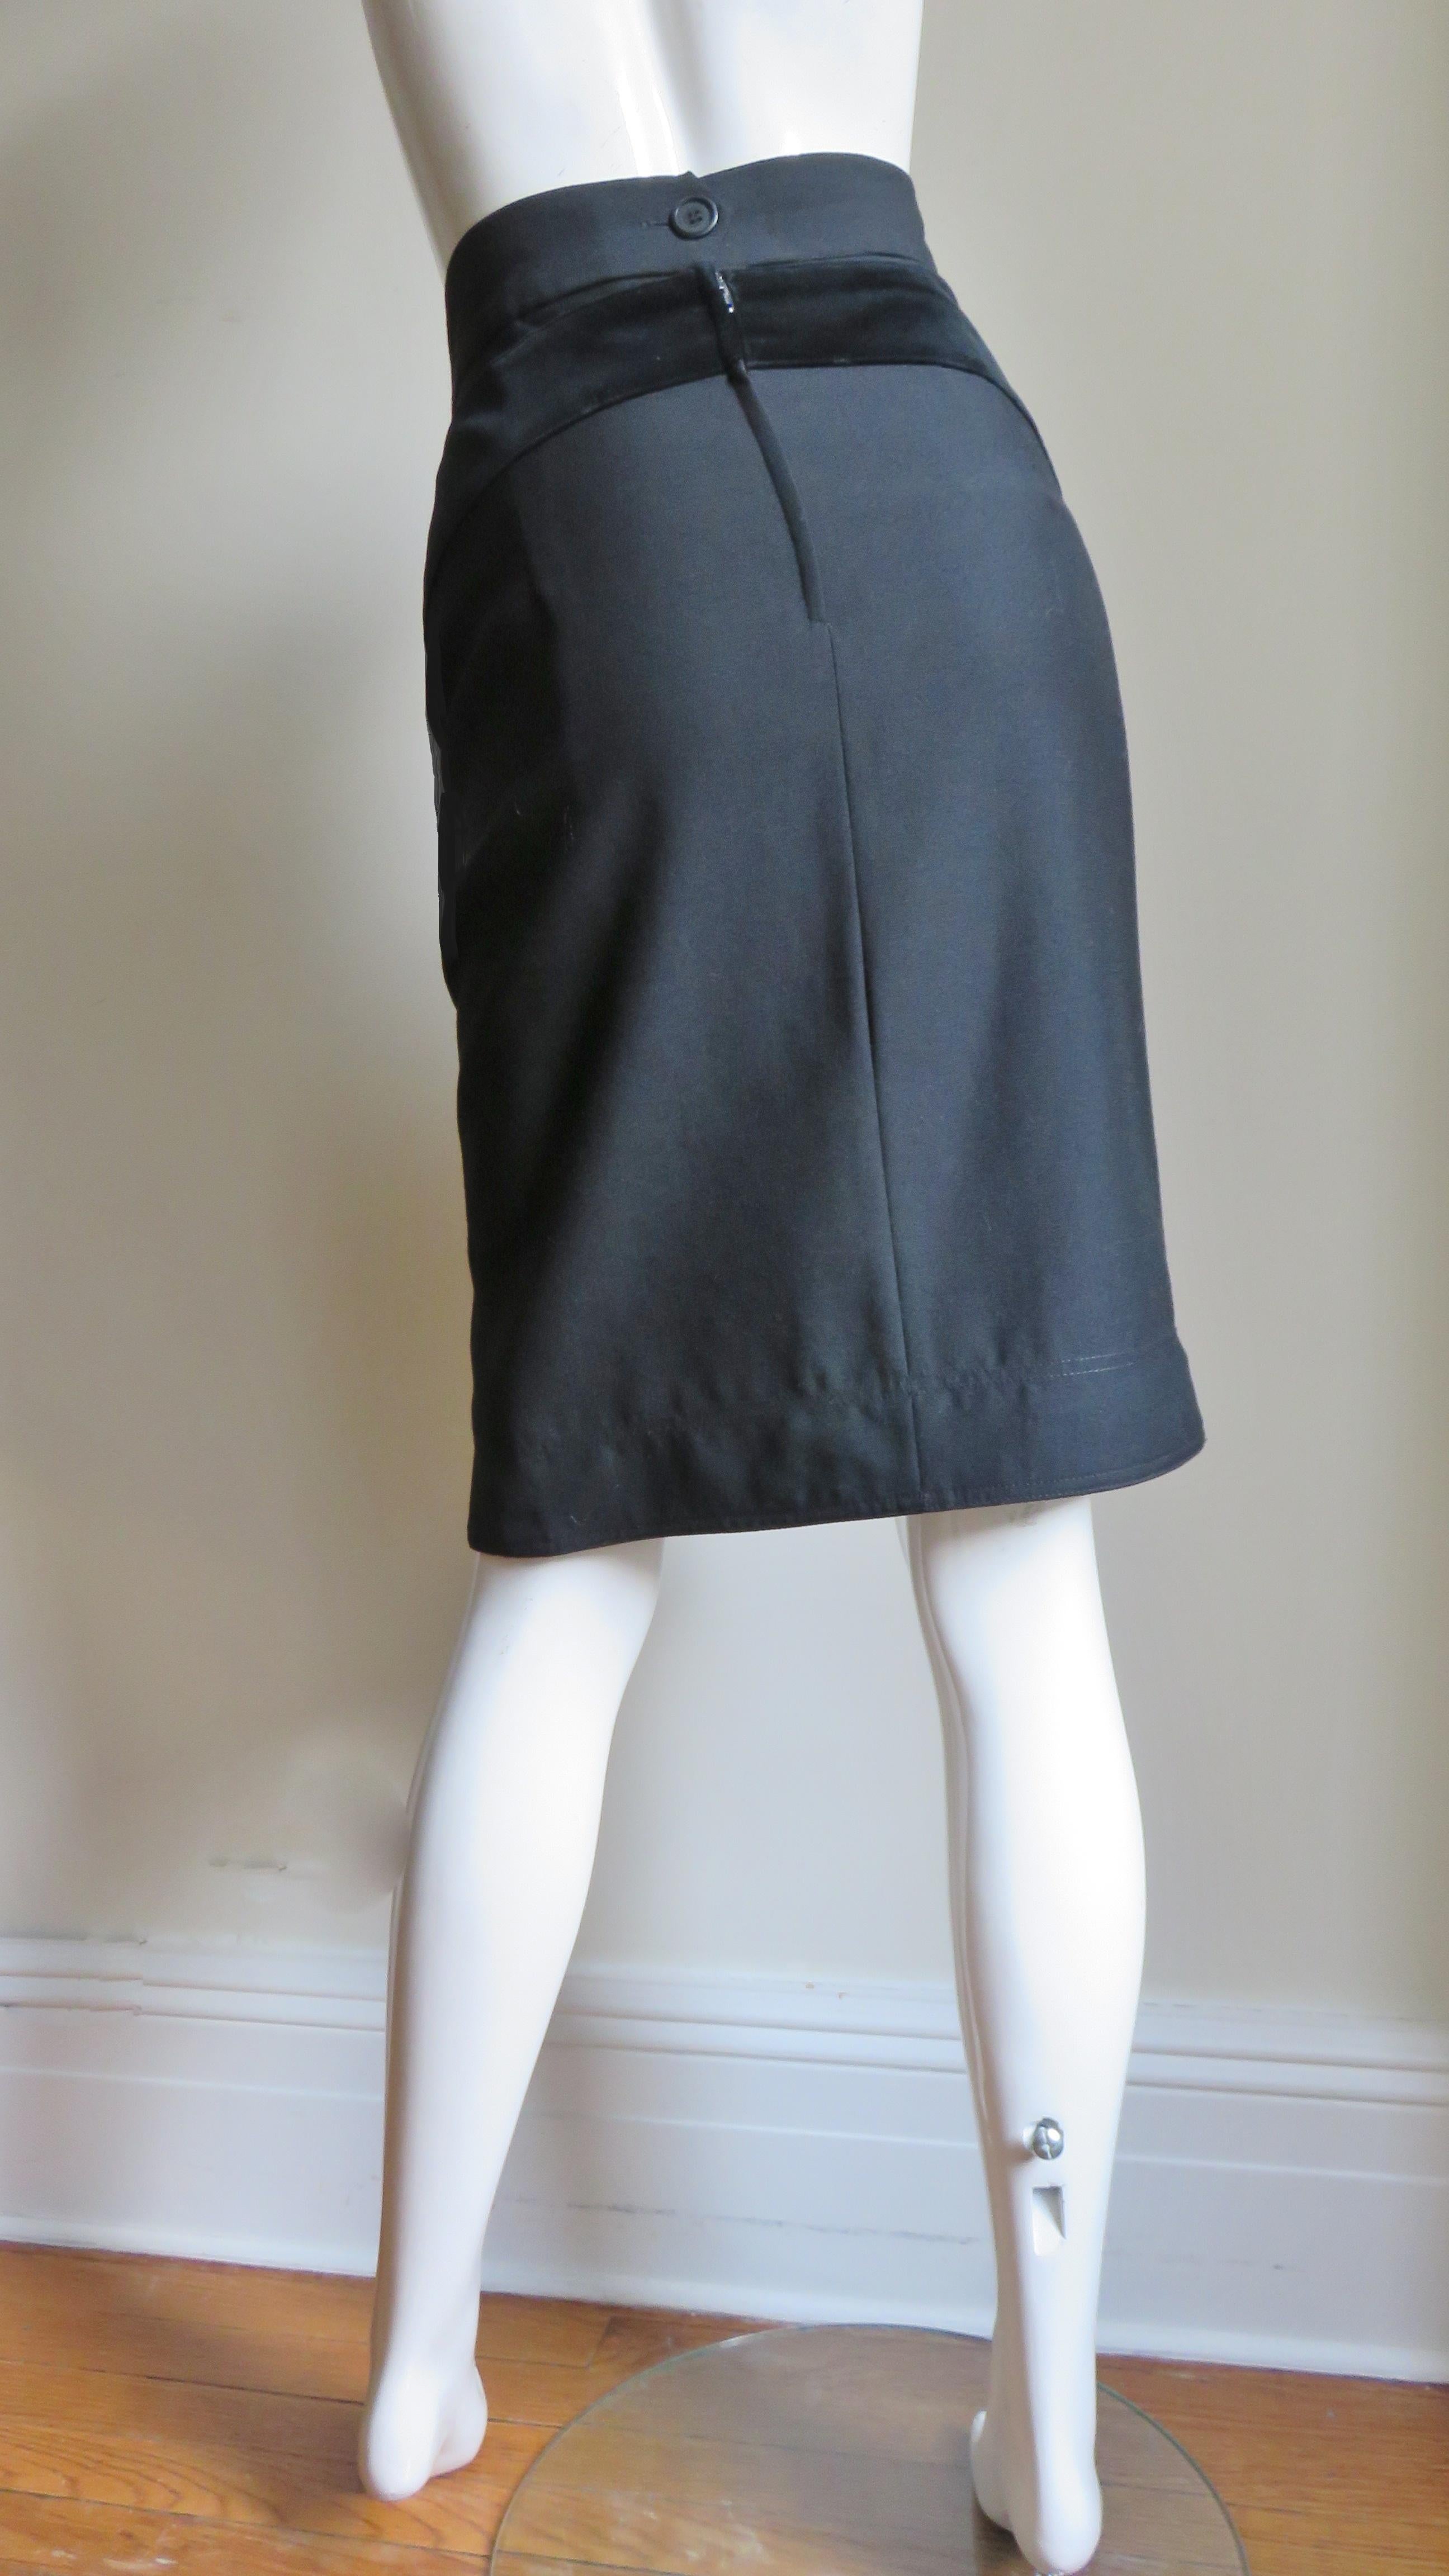 Moschino Question Mark Skirt In Good Condition For Sale In Water Mill, NY